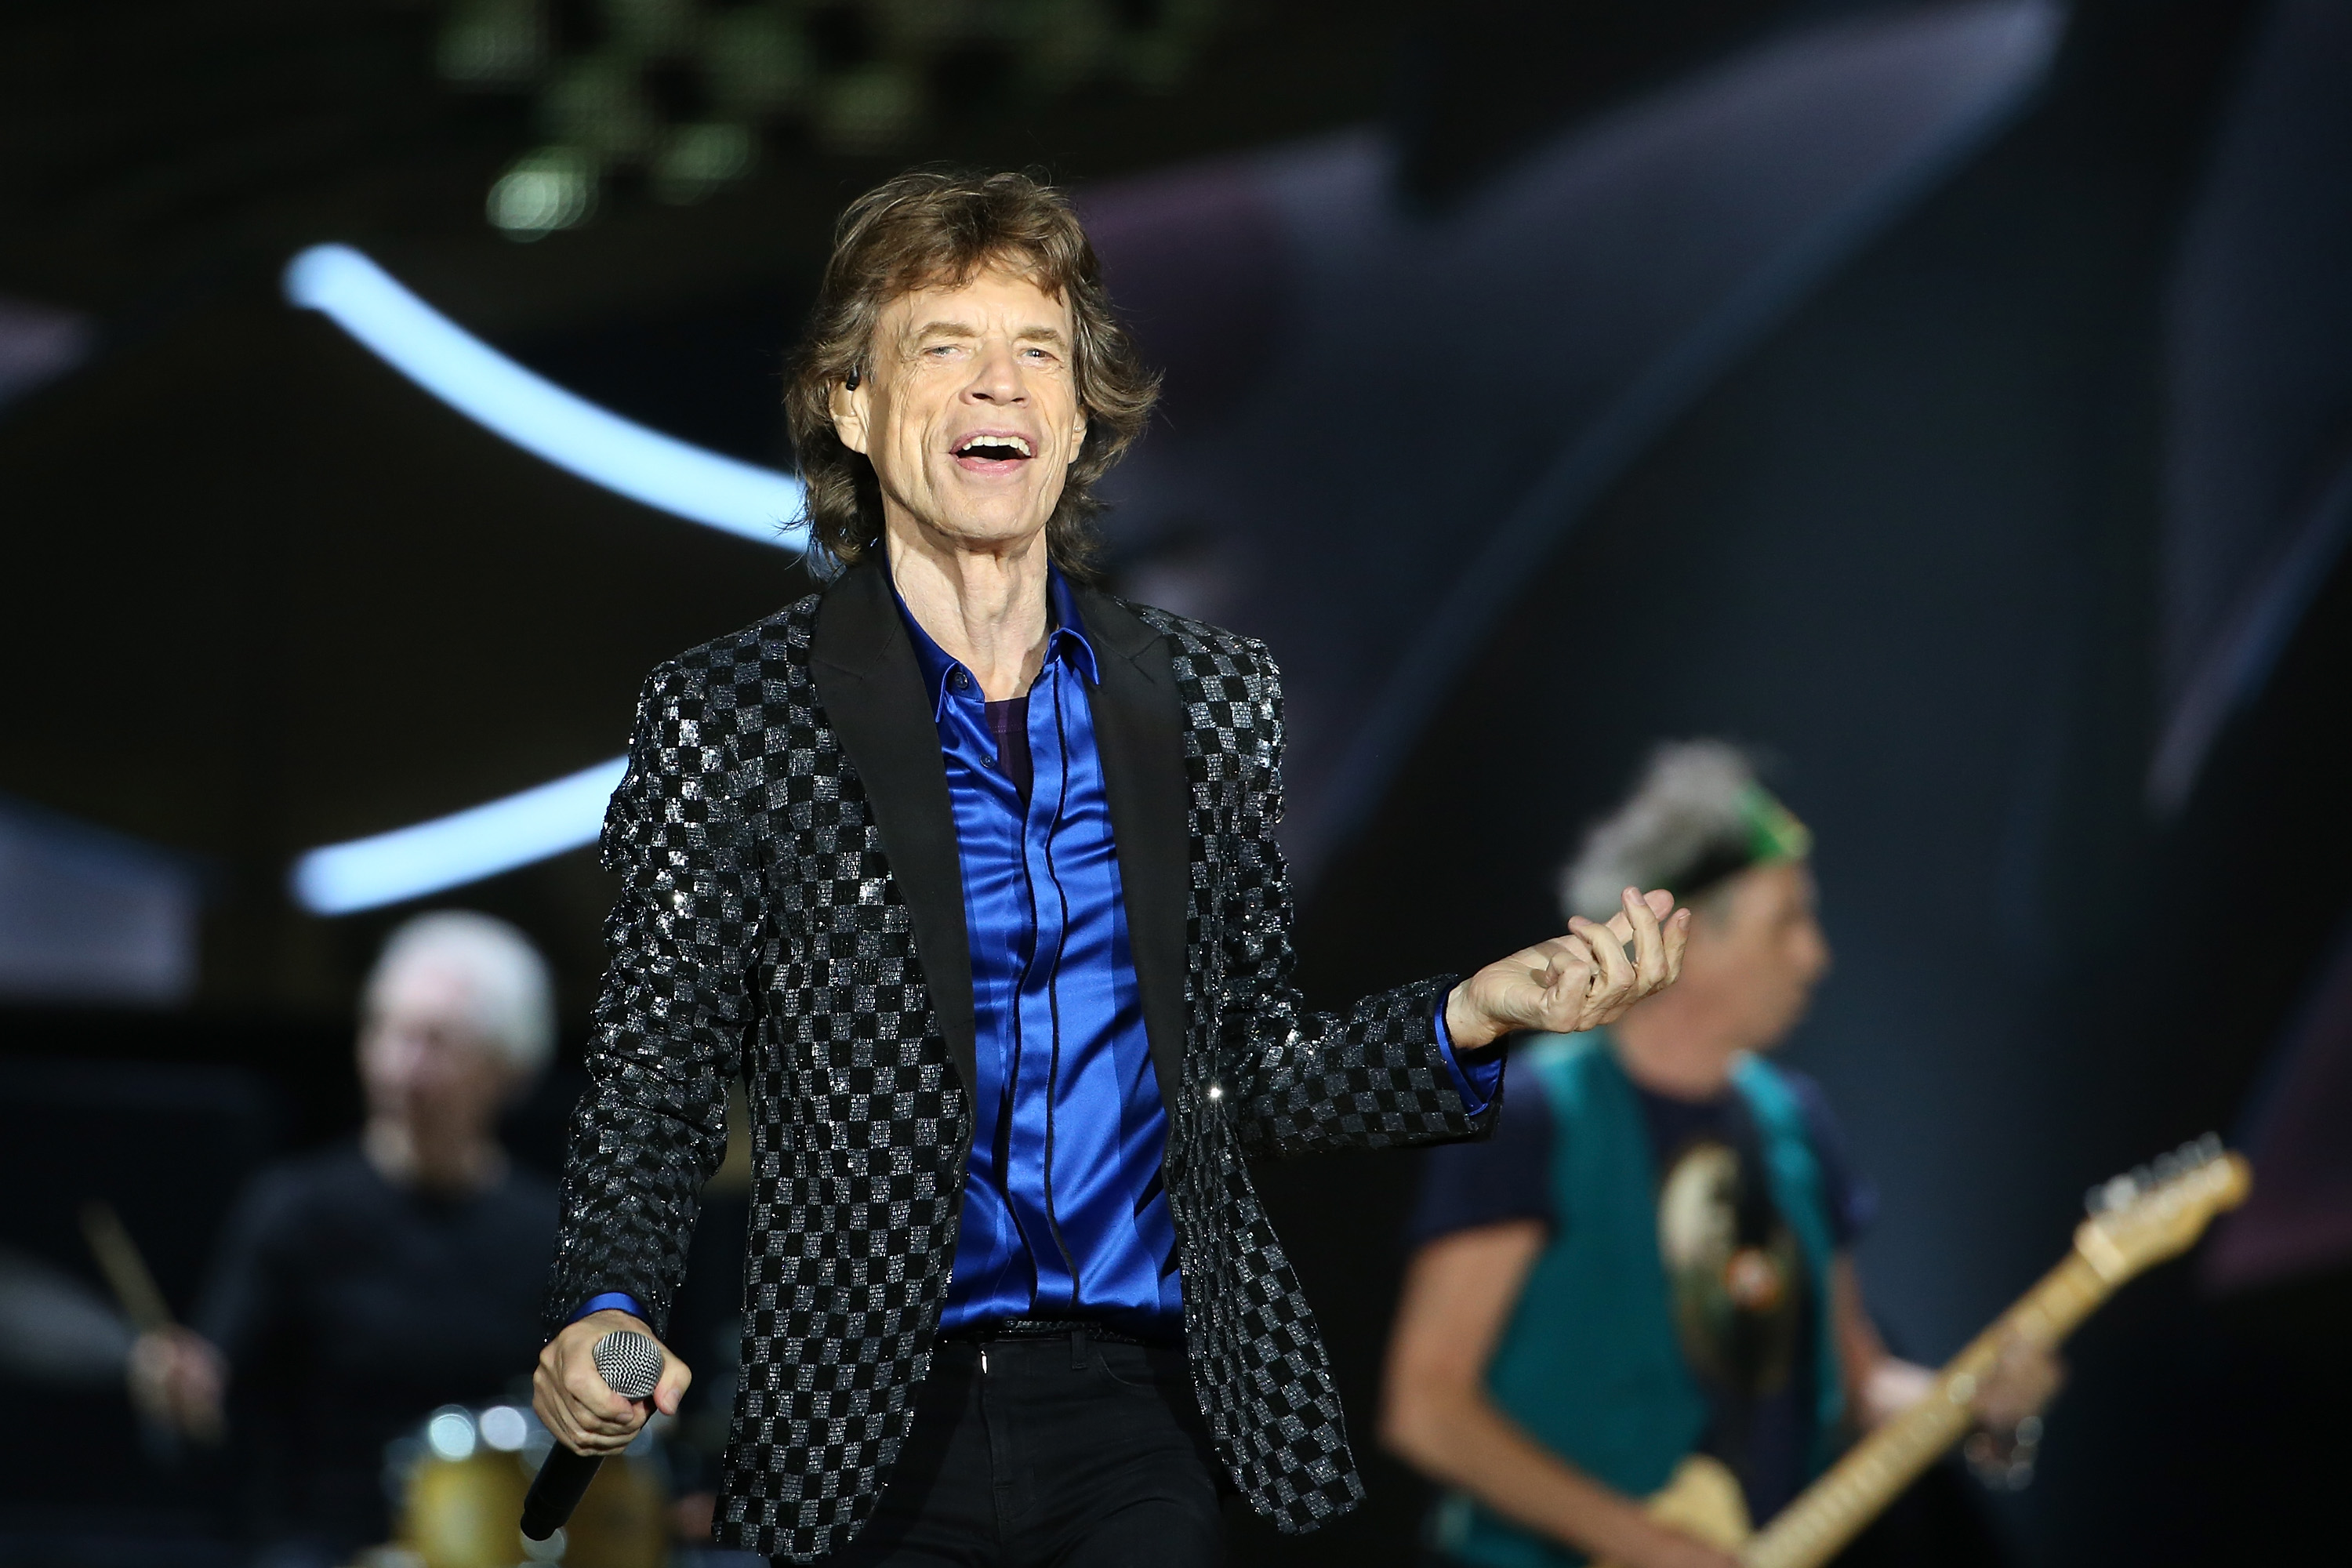 Mick Jagger performs on stage.